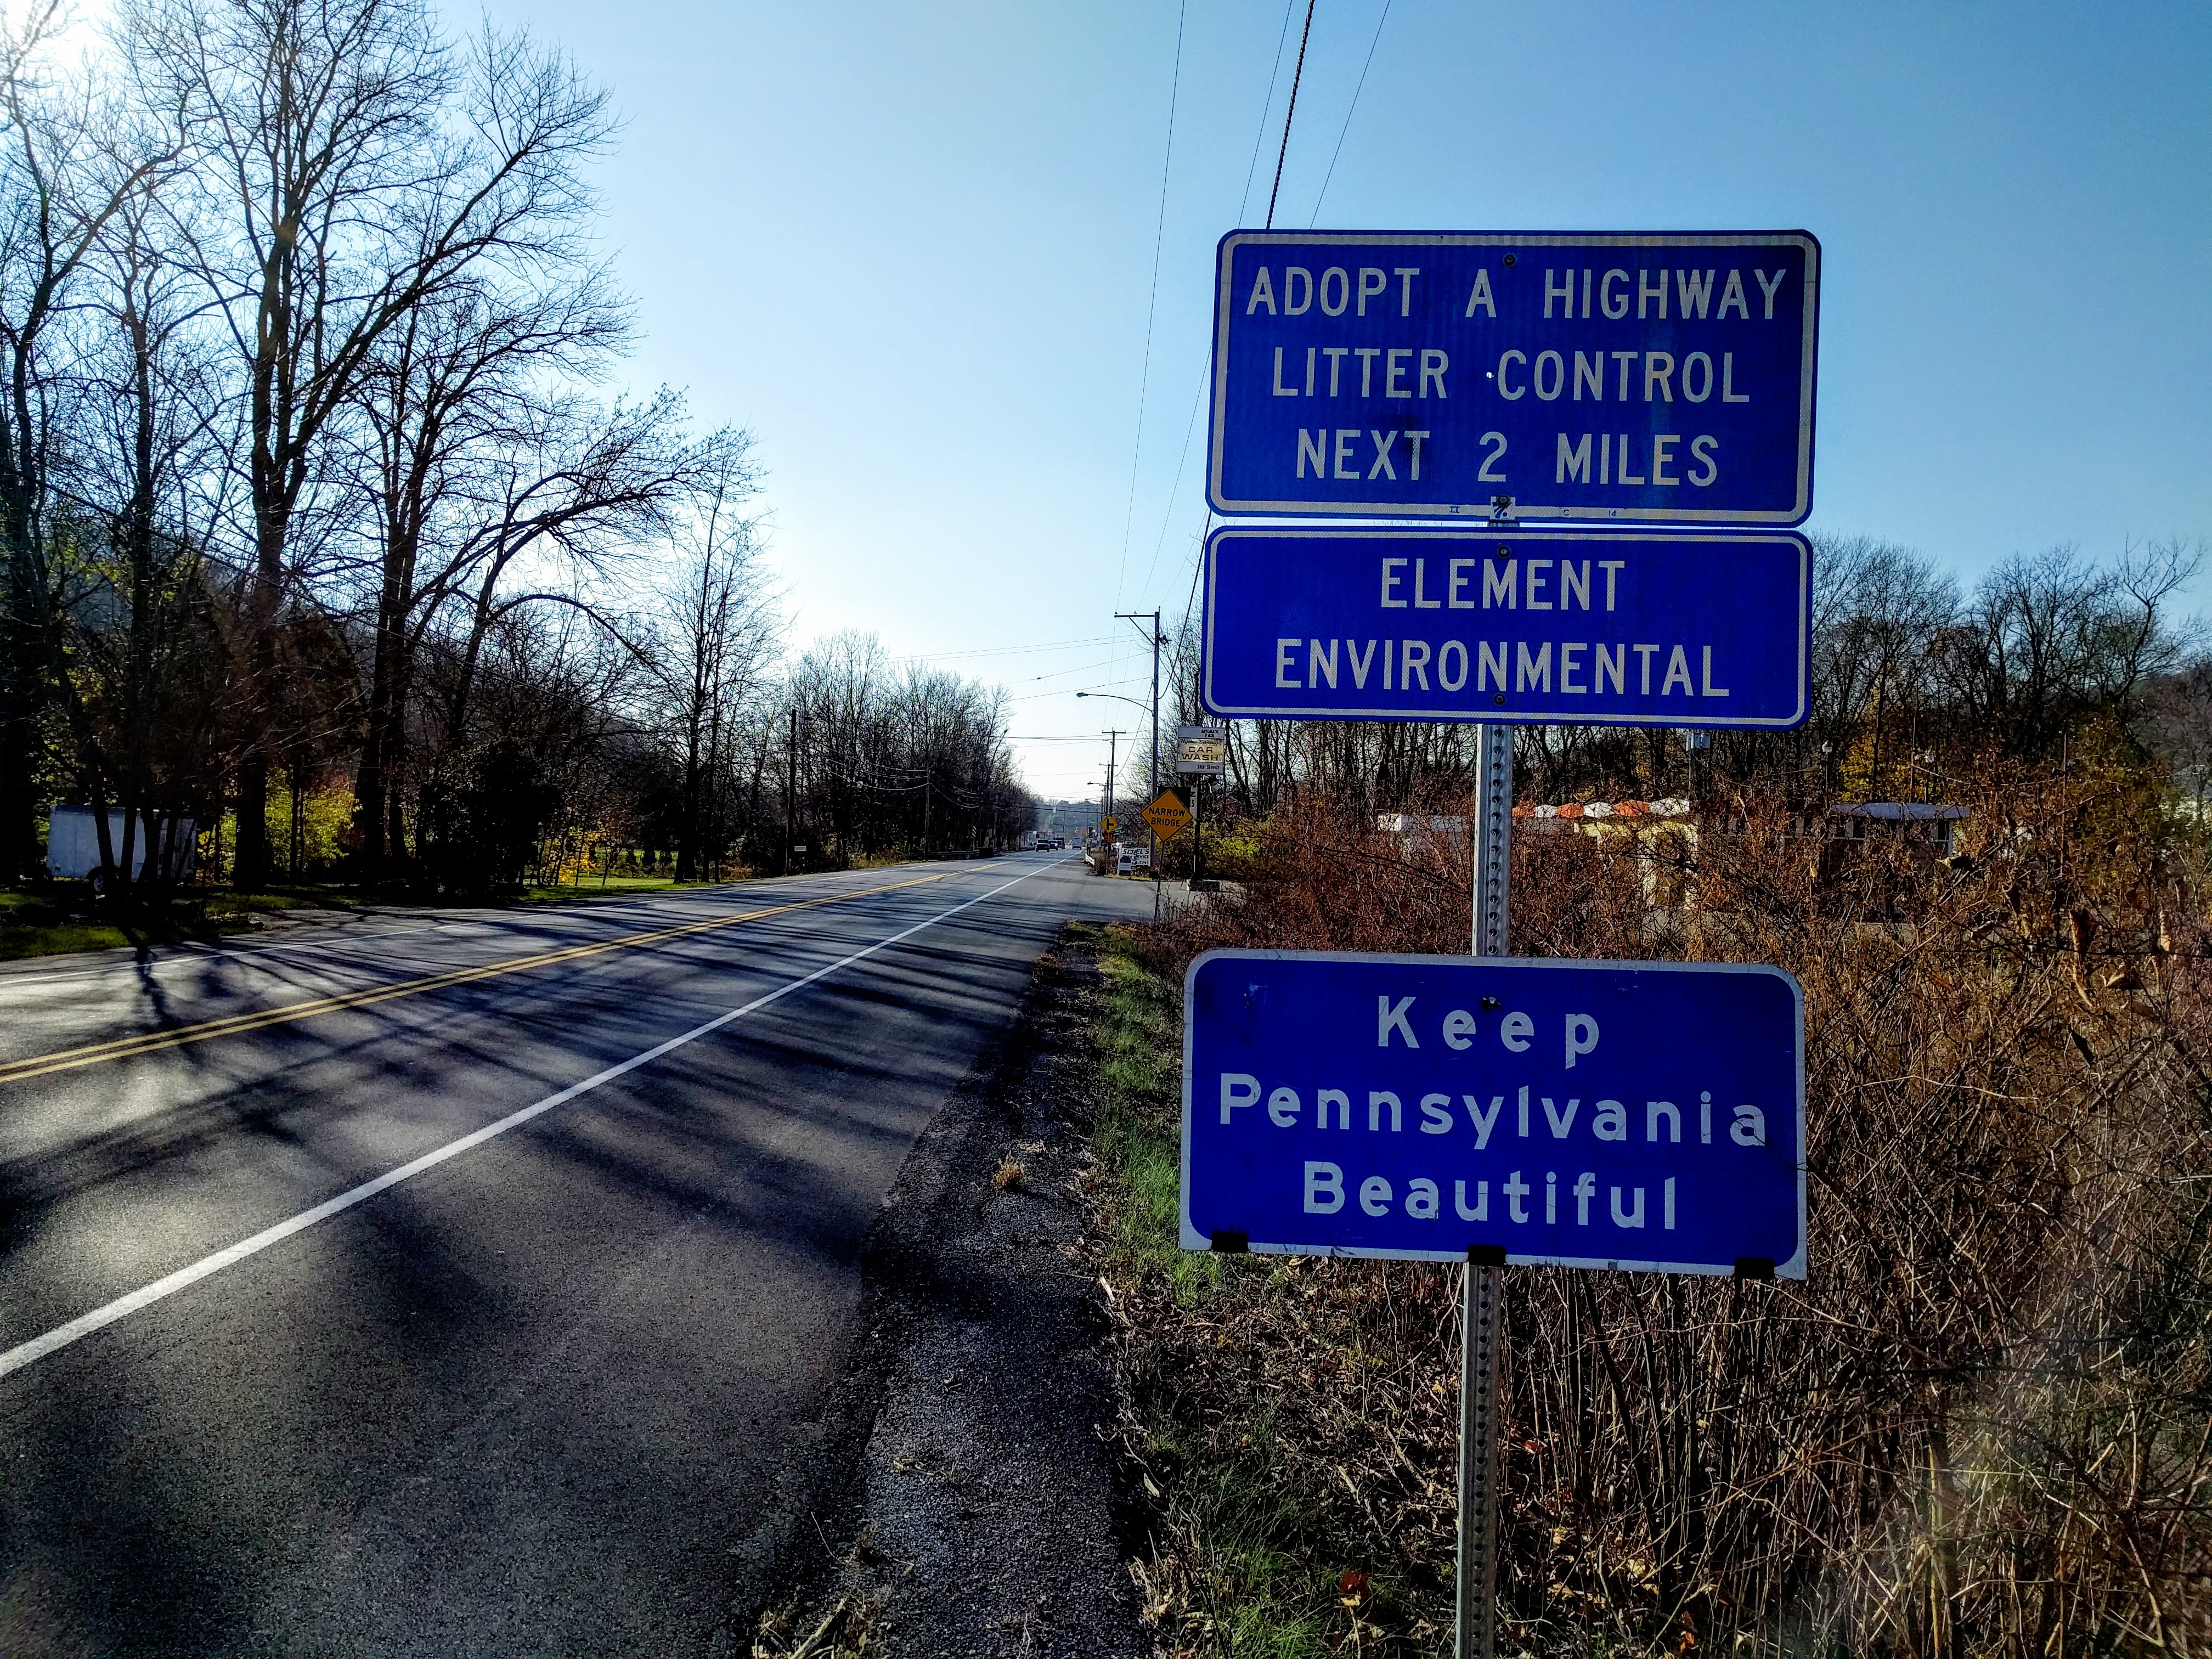 Element Adopted-a-Highway